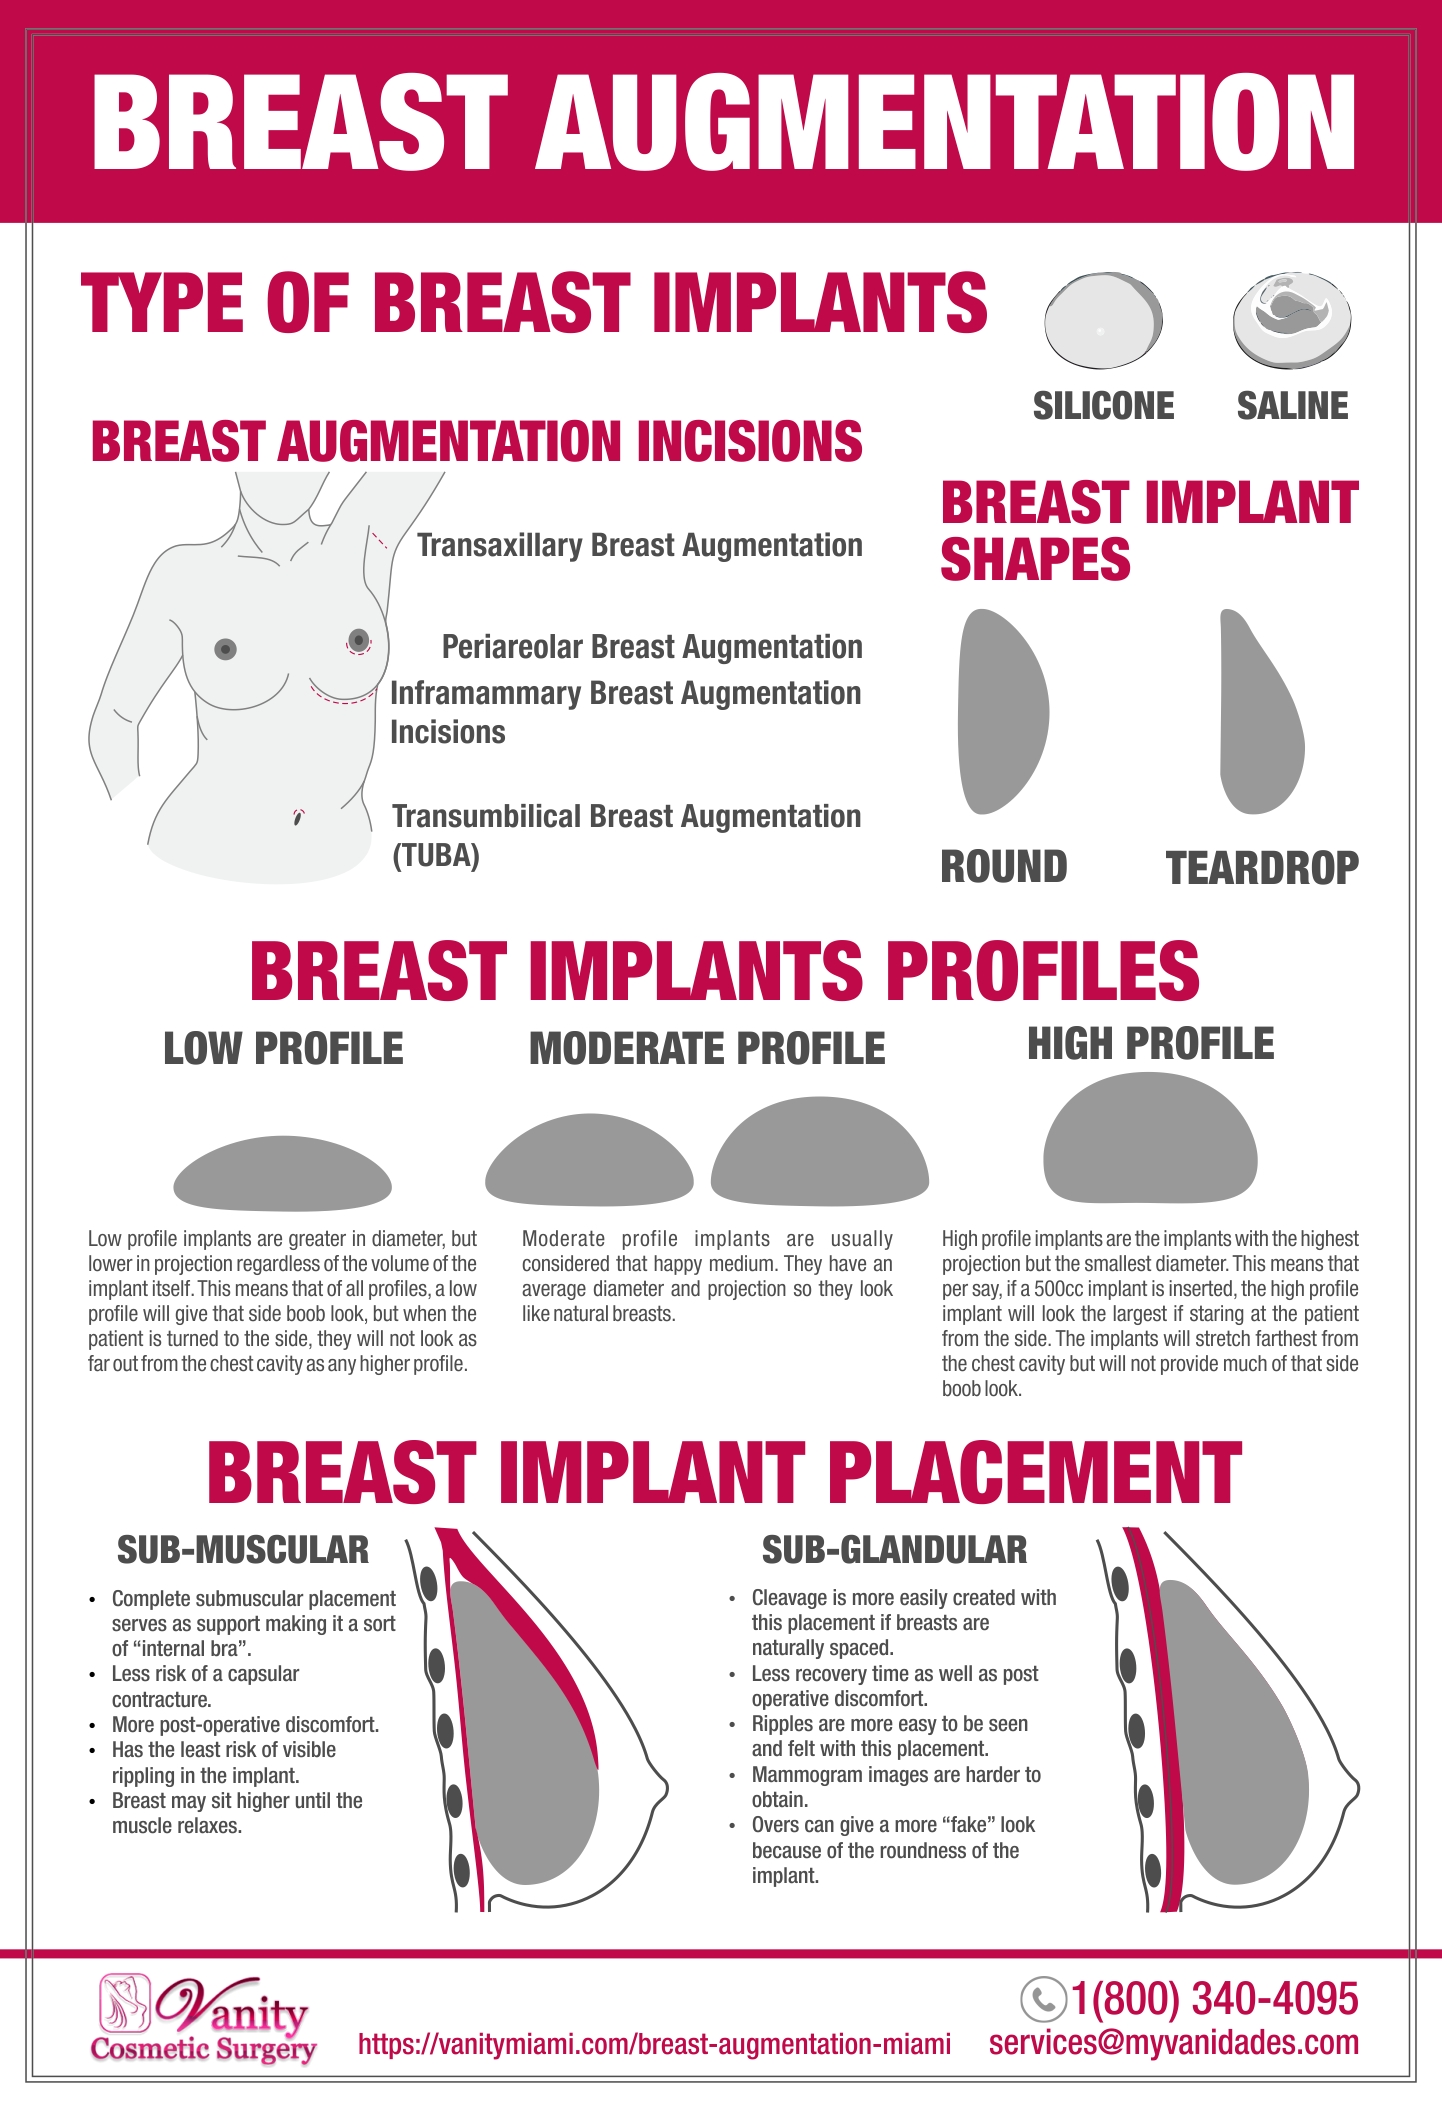 All about breast implant profiles